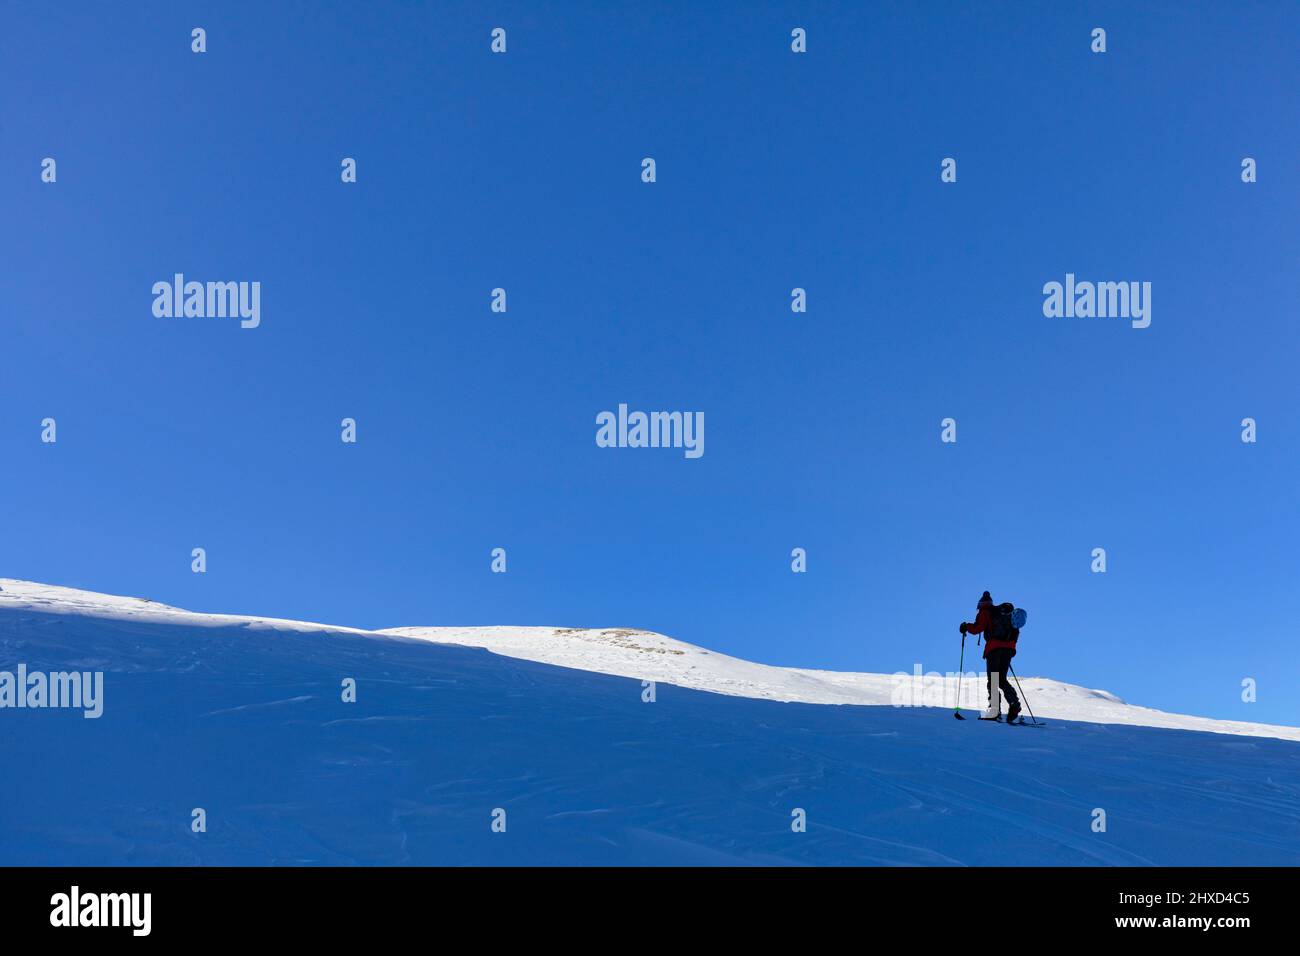 Europe, Italy, Veneto, Belluno province, silhouette of a ski mountaineer uphill along a slope Stock Photo